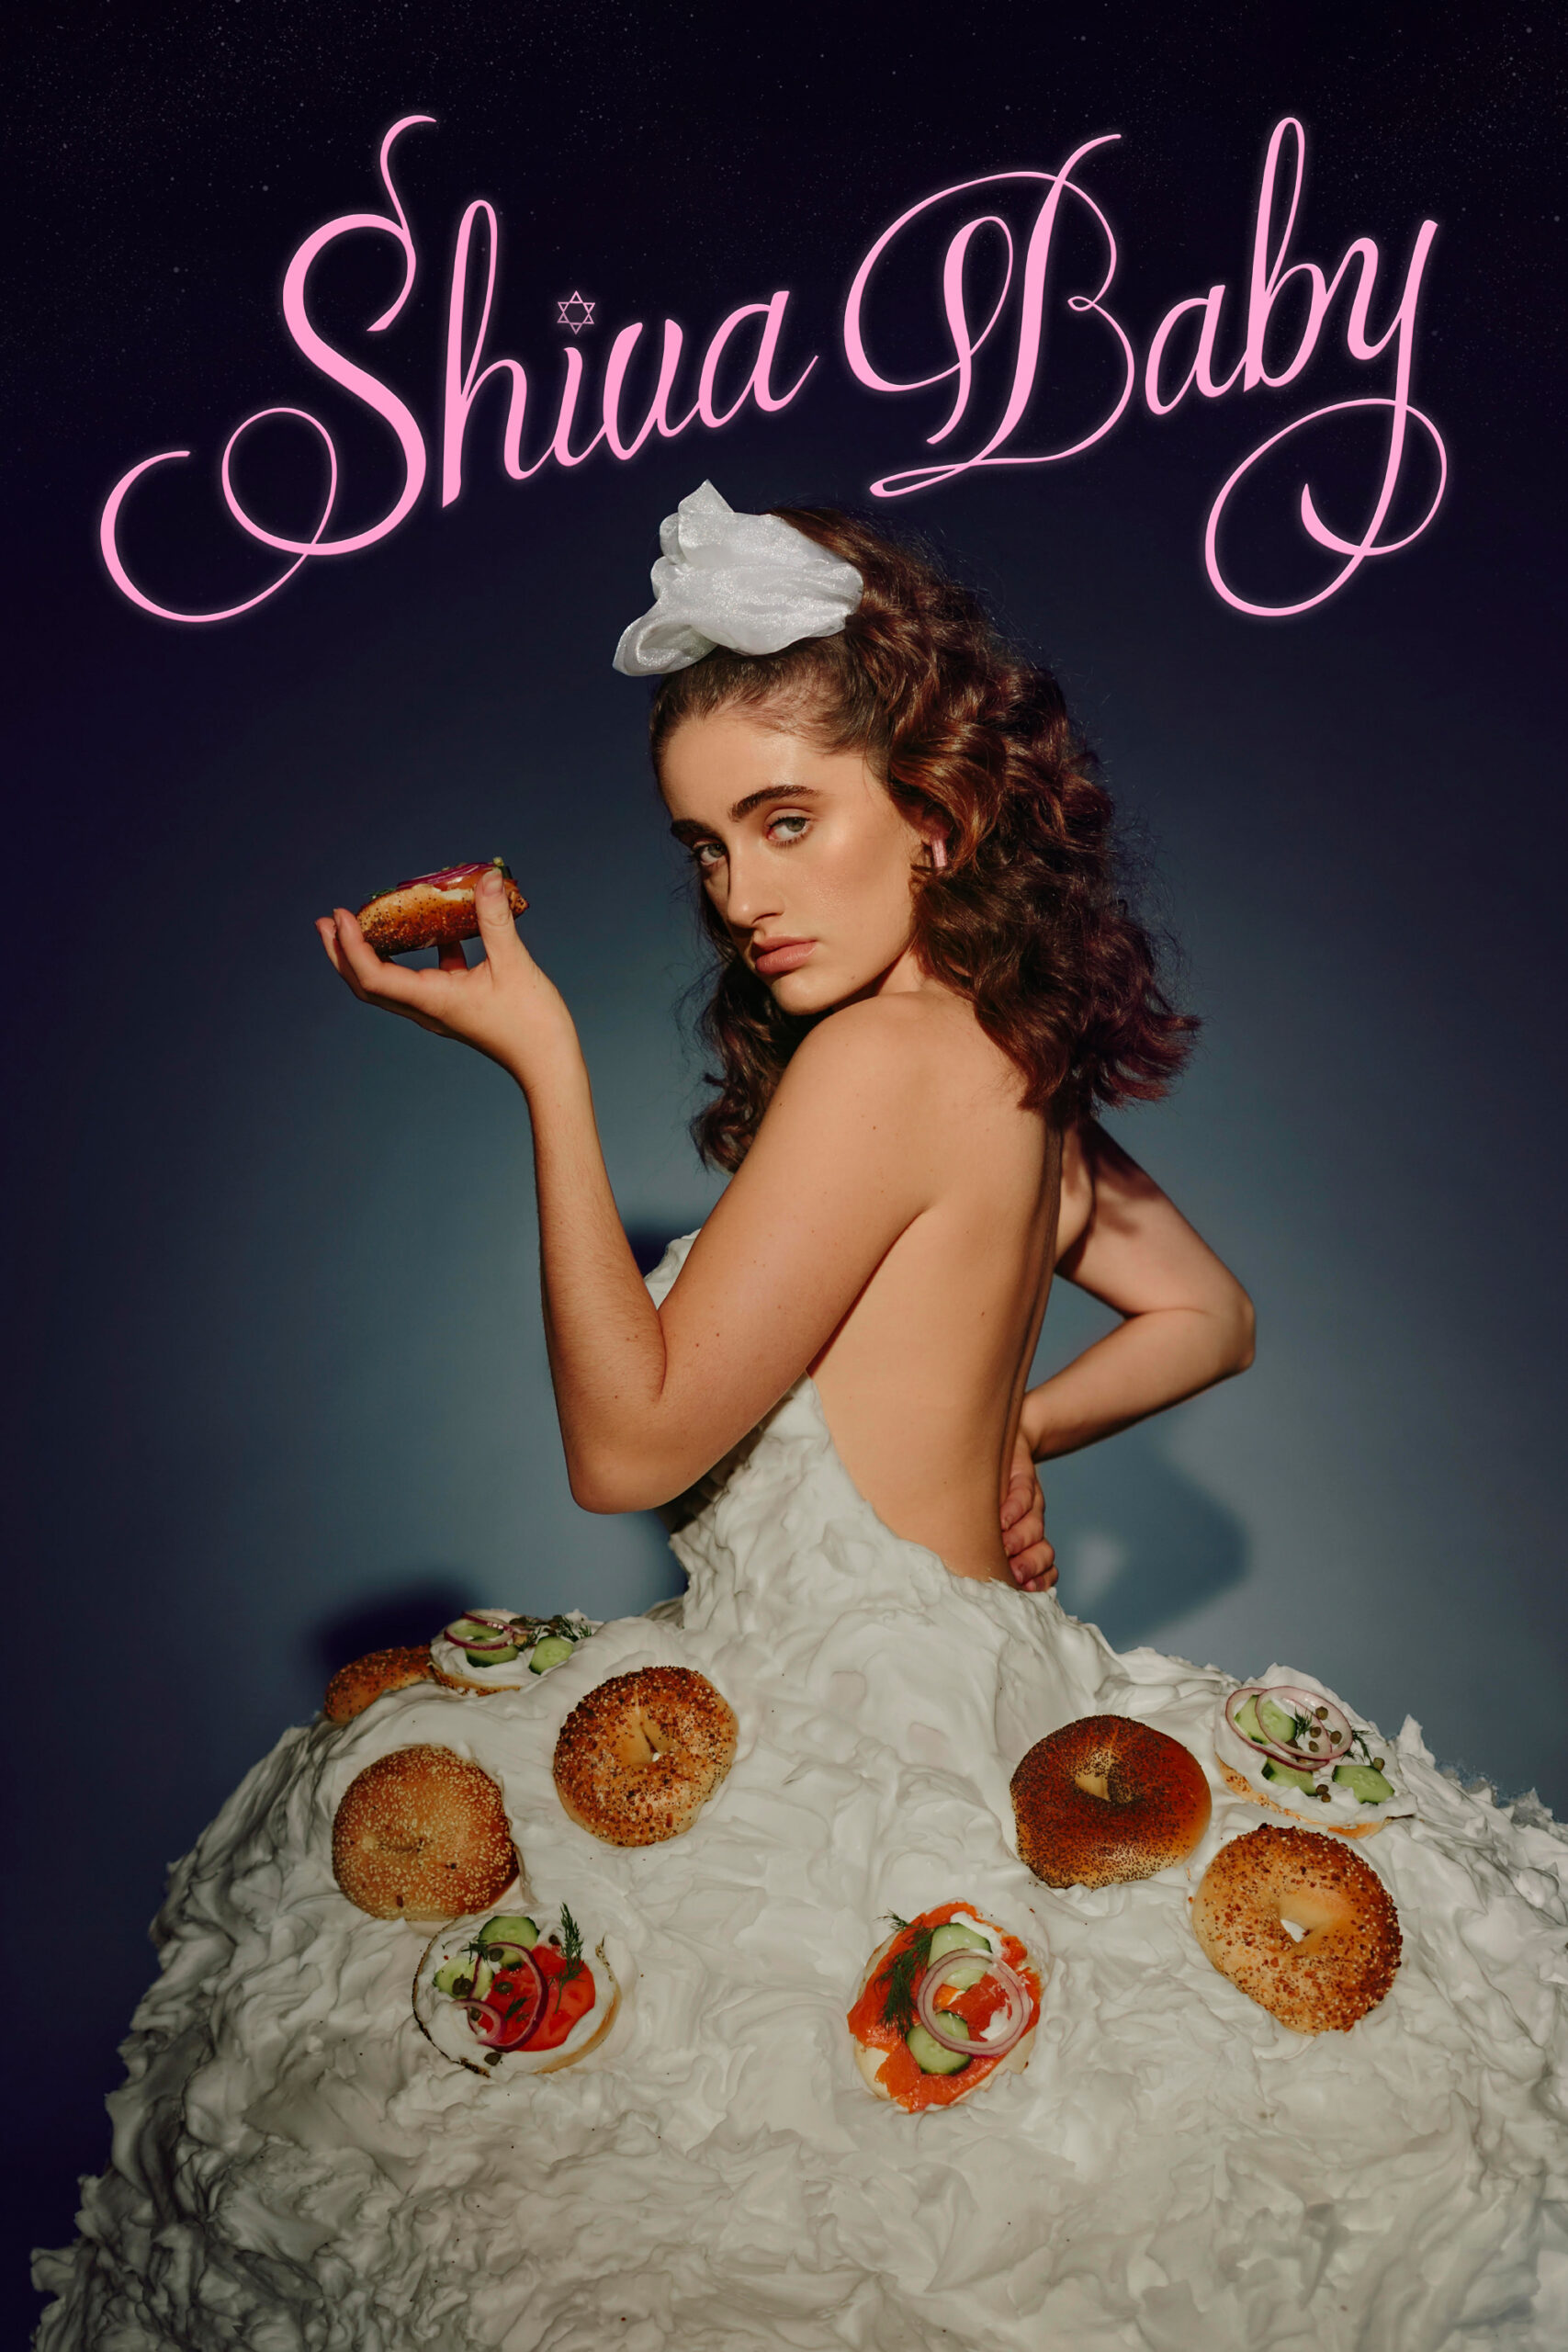 A young woman with brown curly hair wears a white puffy dress covered in bagels